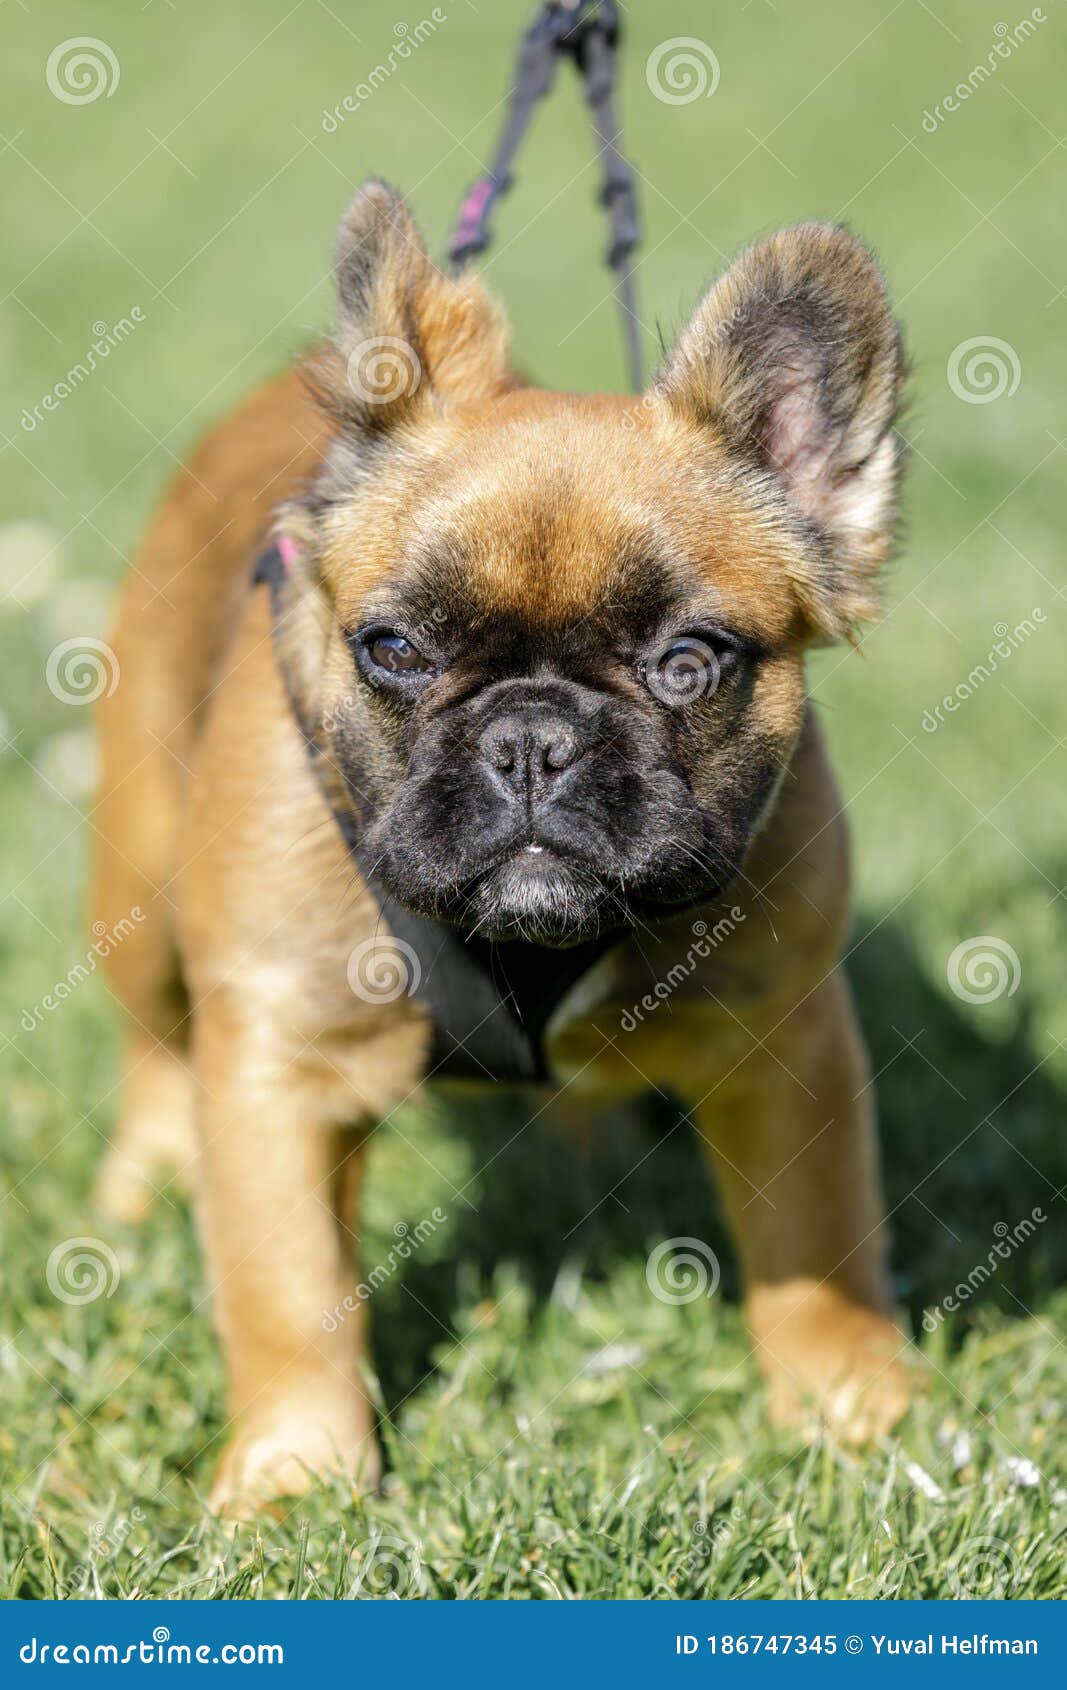 long-haired french bulldog puppy